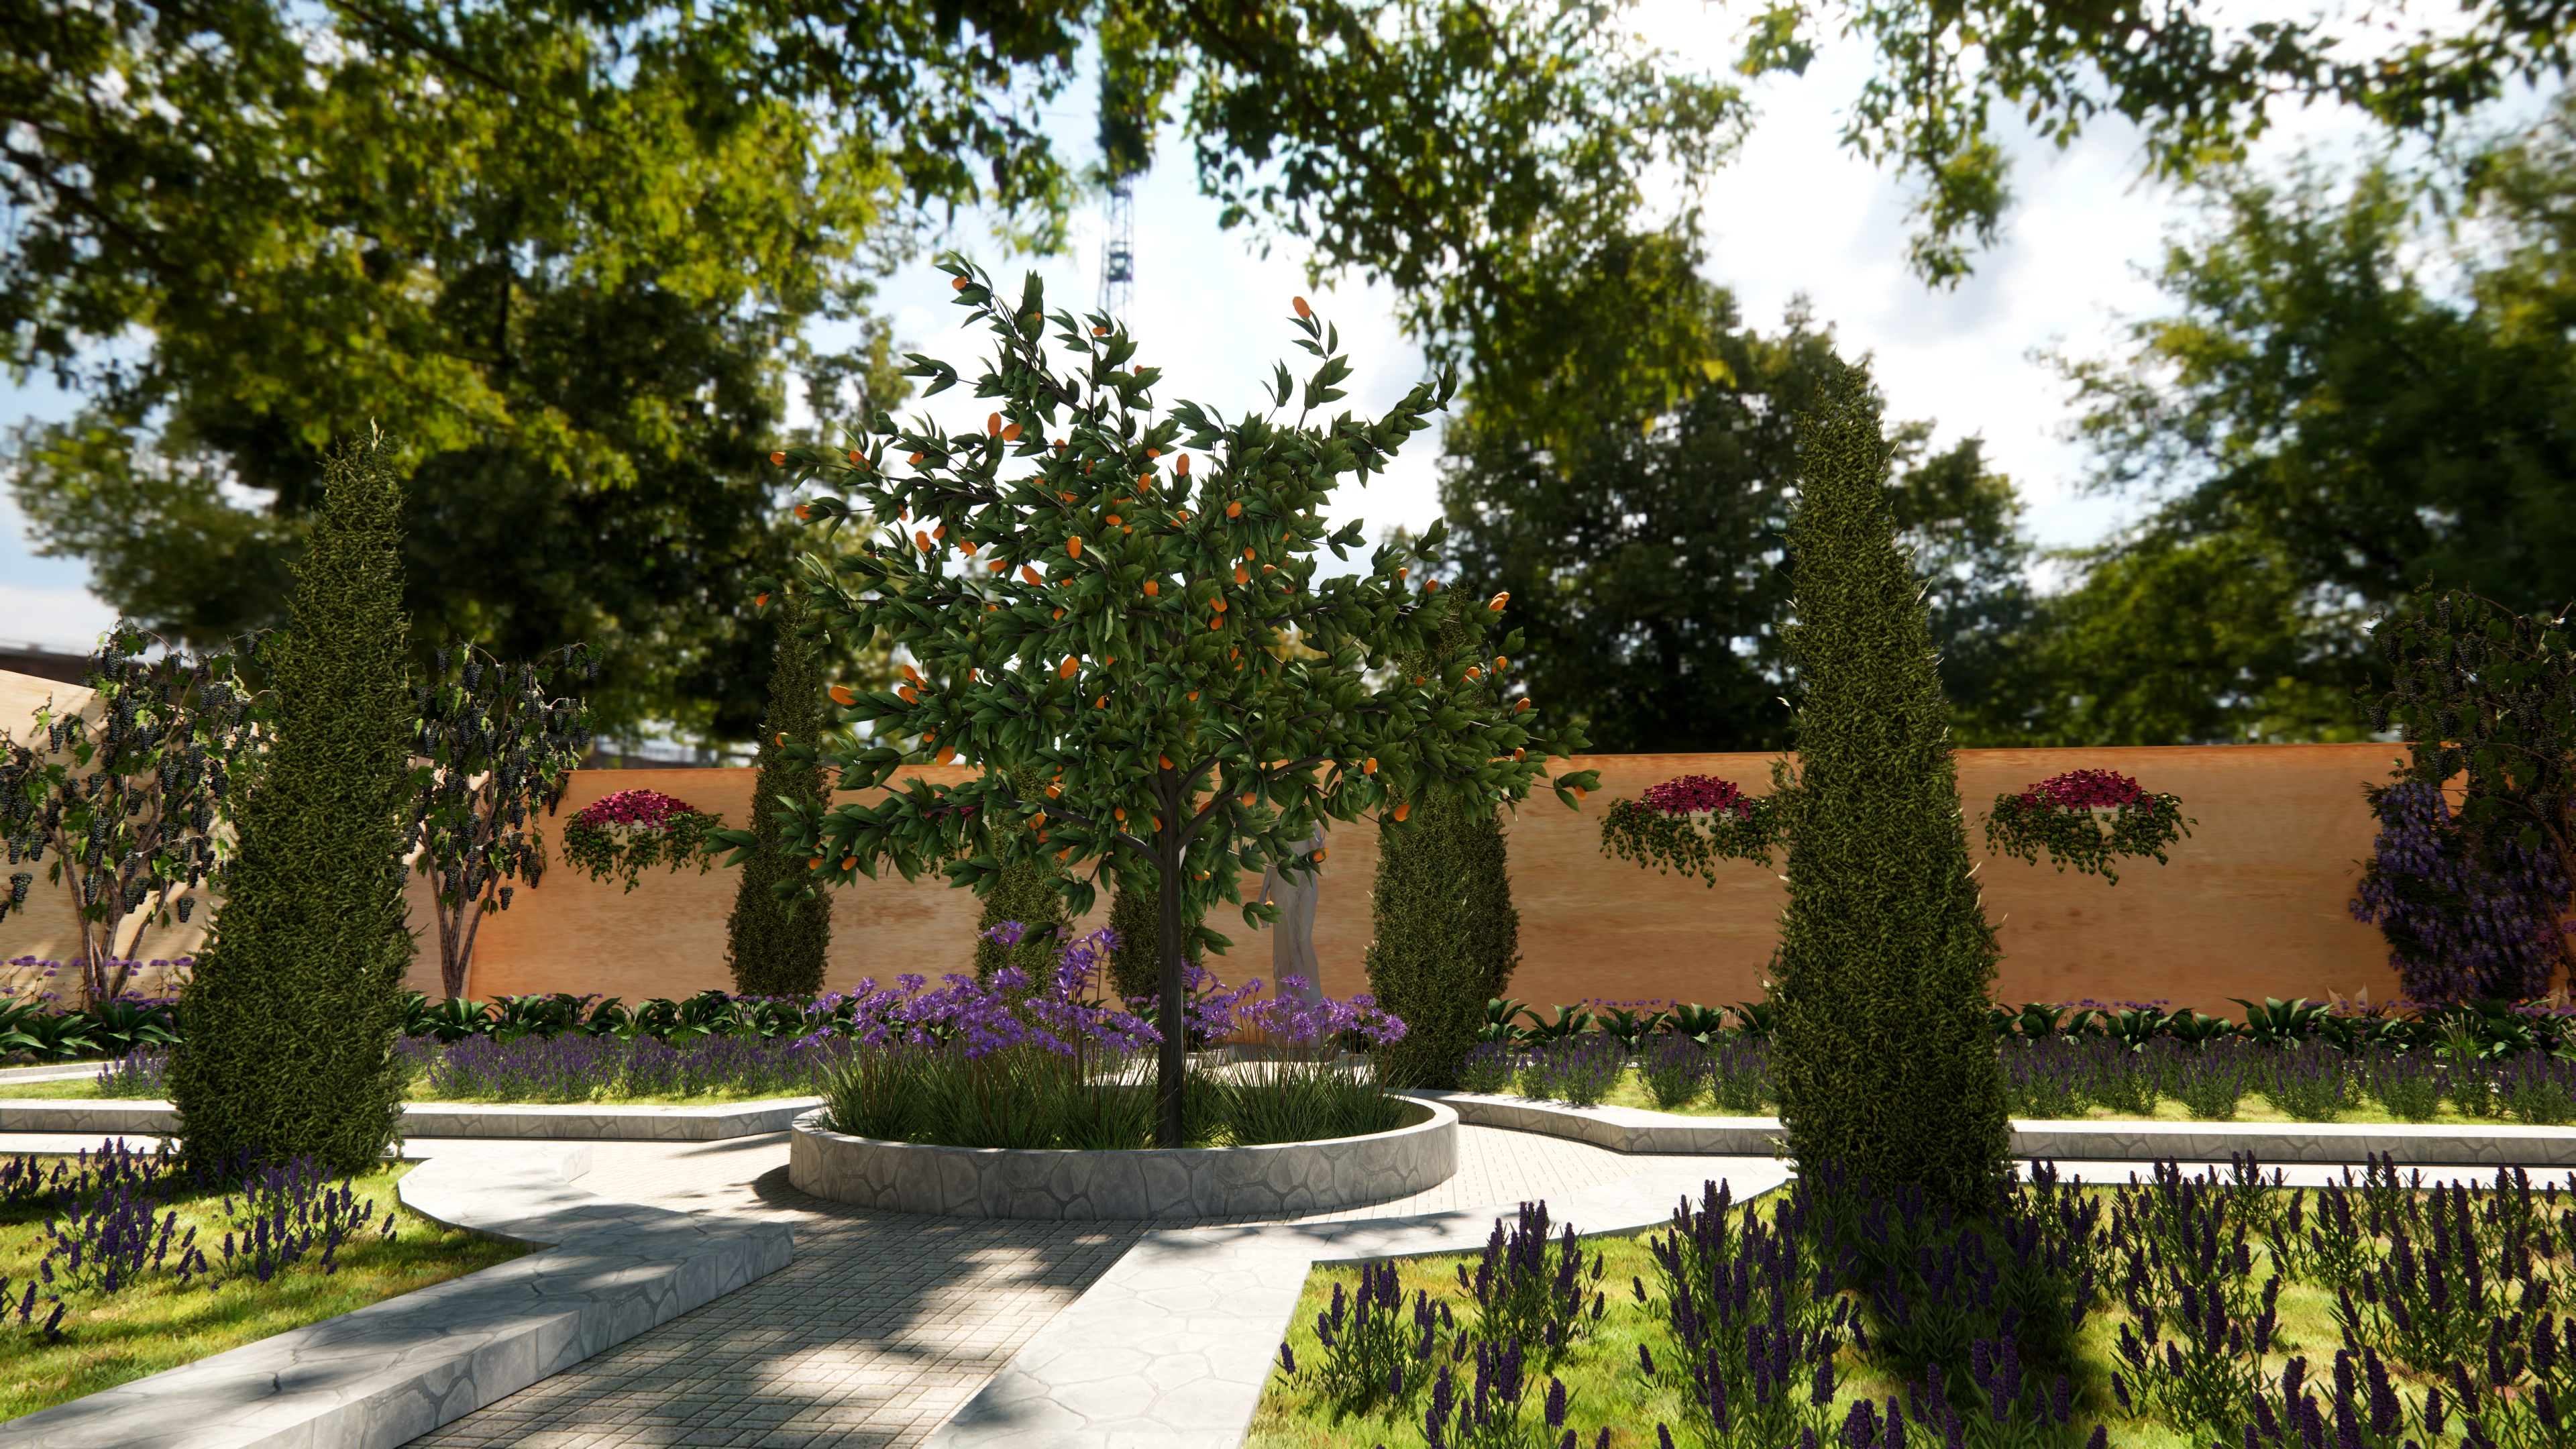 Garden with Italian reminiscences re-edition created by Rosana Almuzara with Lands Design and Enscape